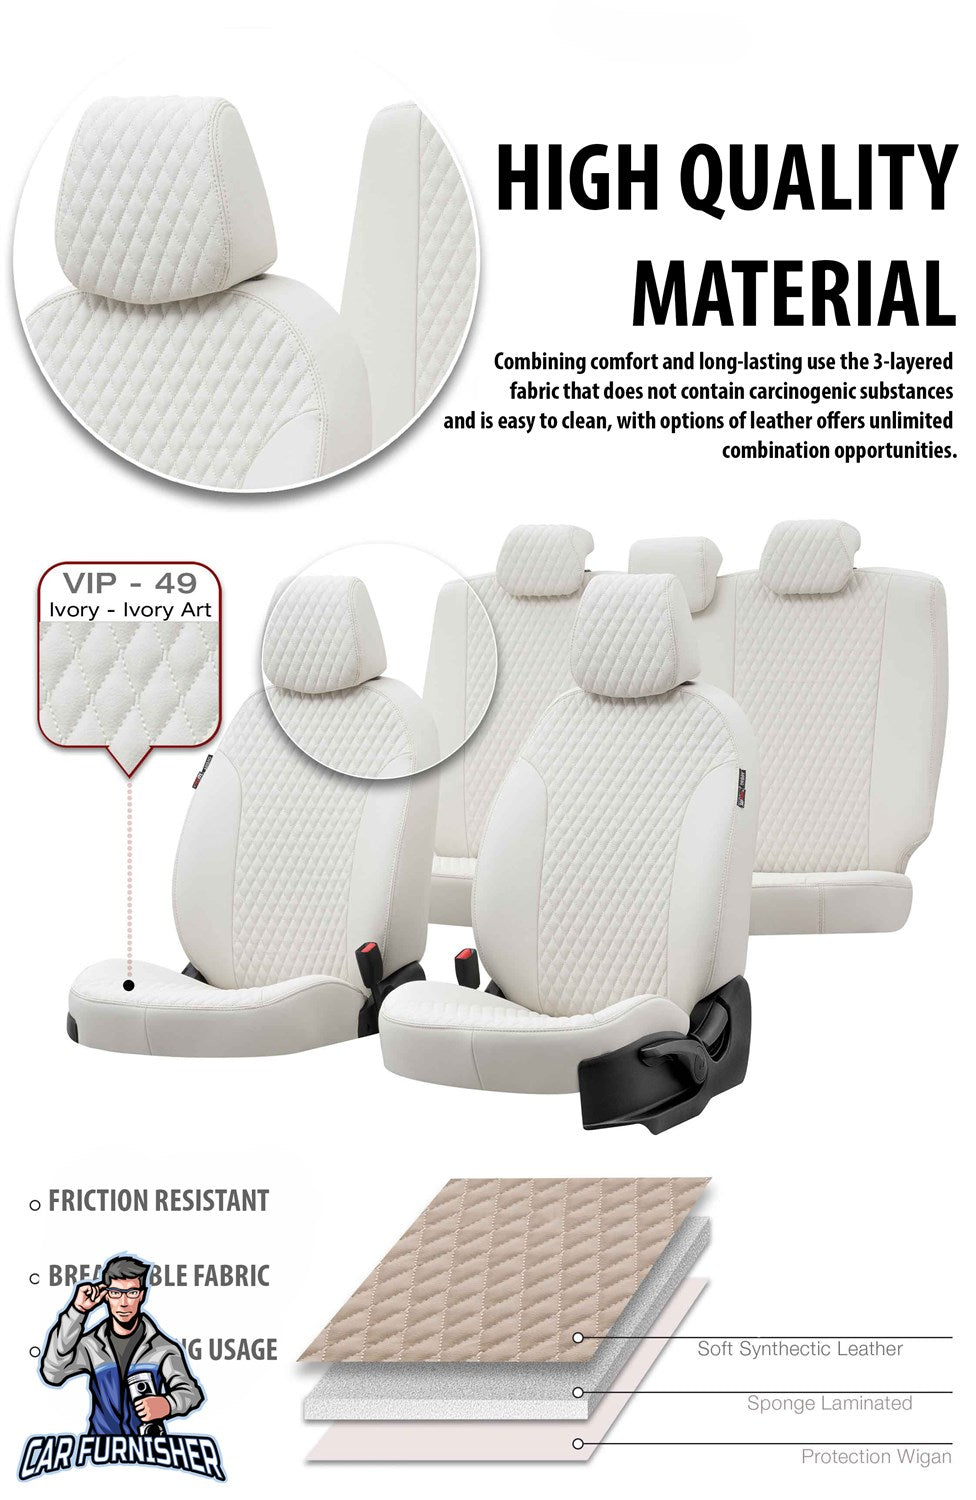 Toyota Rav4 Seat Cover Amsterdam Leather Design Ivory Leather